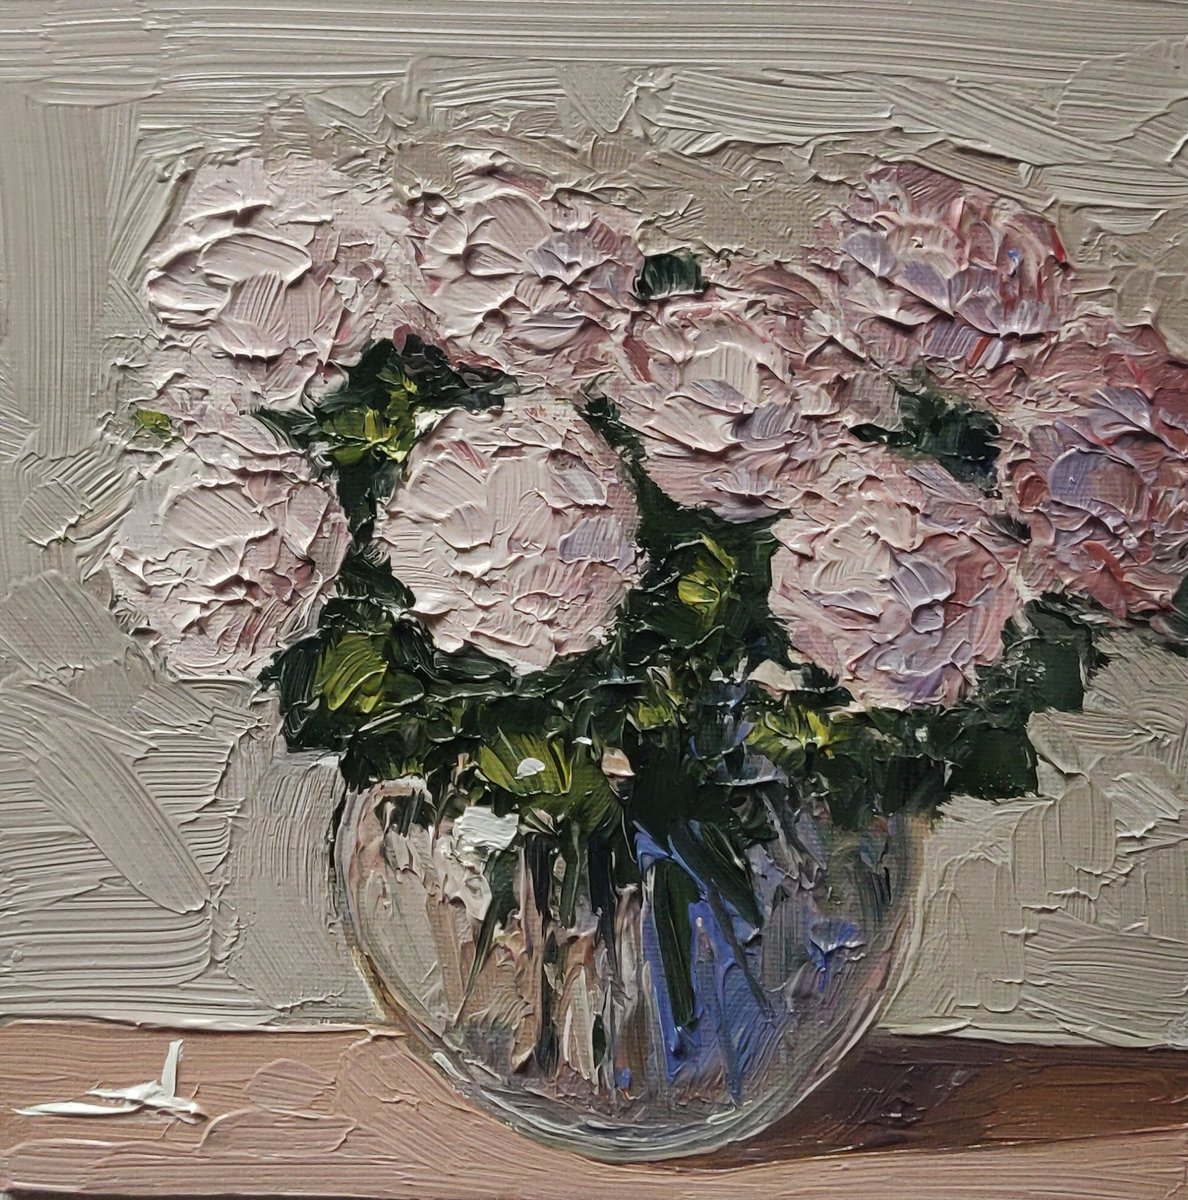 Pink Flowers 8 X 8 Inches Oil on Canvas Board Available at auction #artcollectors #oilpainting #impressionism #interiordesign #homedecor #ArtLovers #impasto #artist #originalart #paintings #artforsale